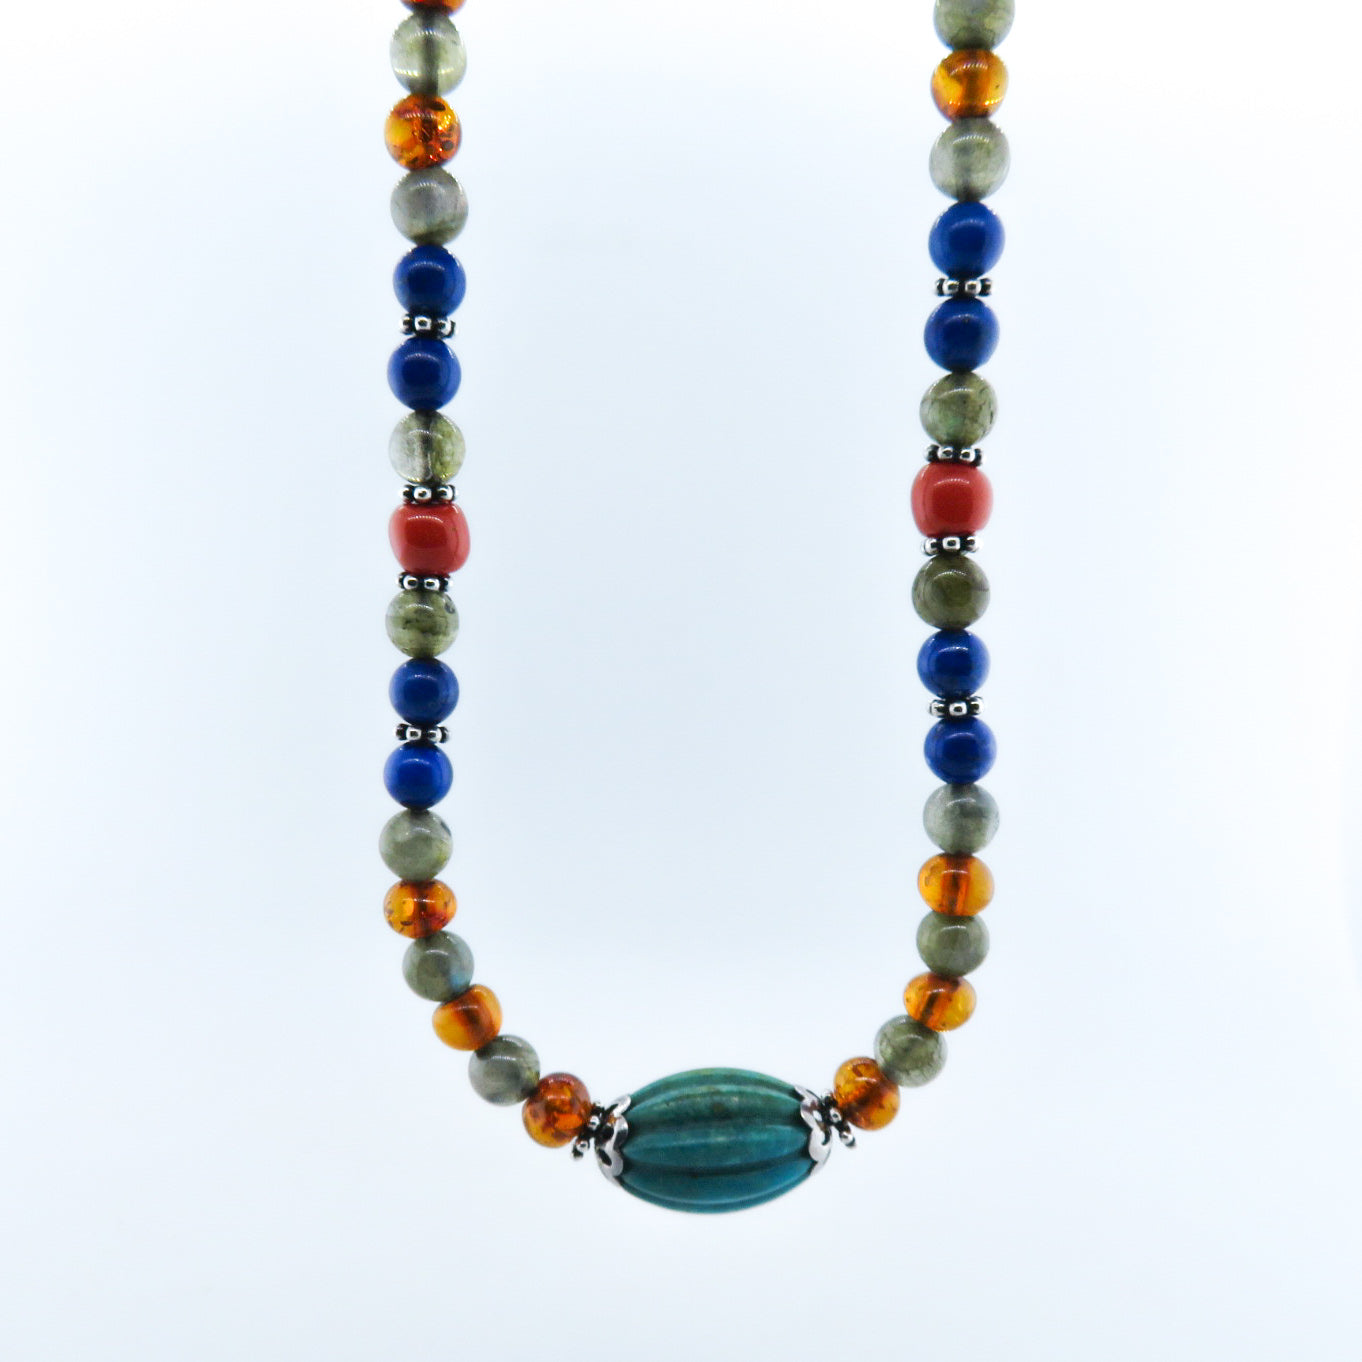 Mixed Stone Beads (Turquoise, Amber, Labradorite, Lapis Lazuli, Italian Red Coral) with Silver Beads